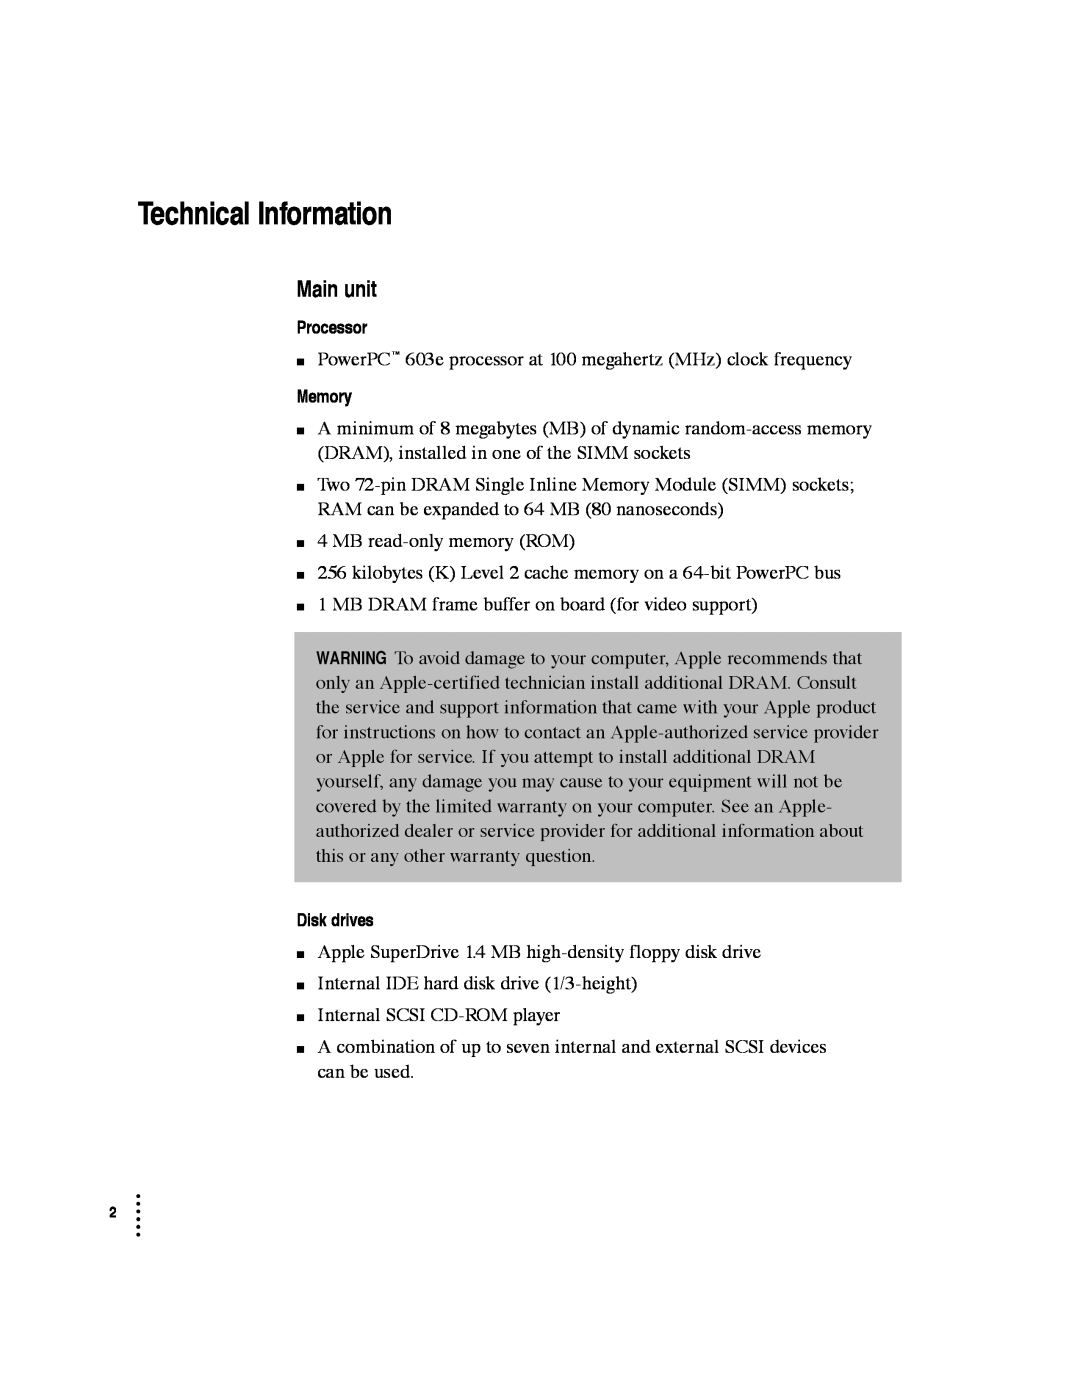 Apple 5300CD specifications Main unit, Technical Information 